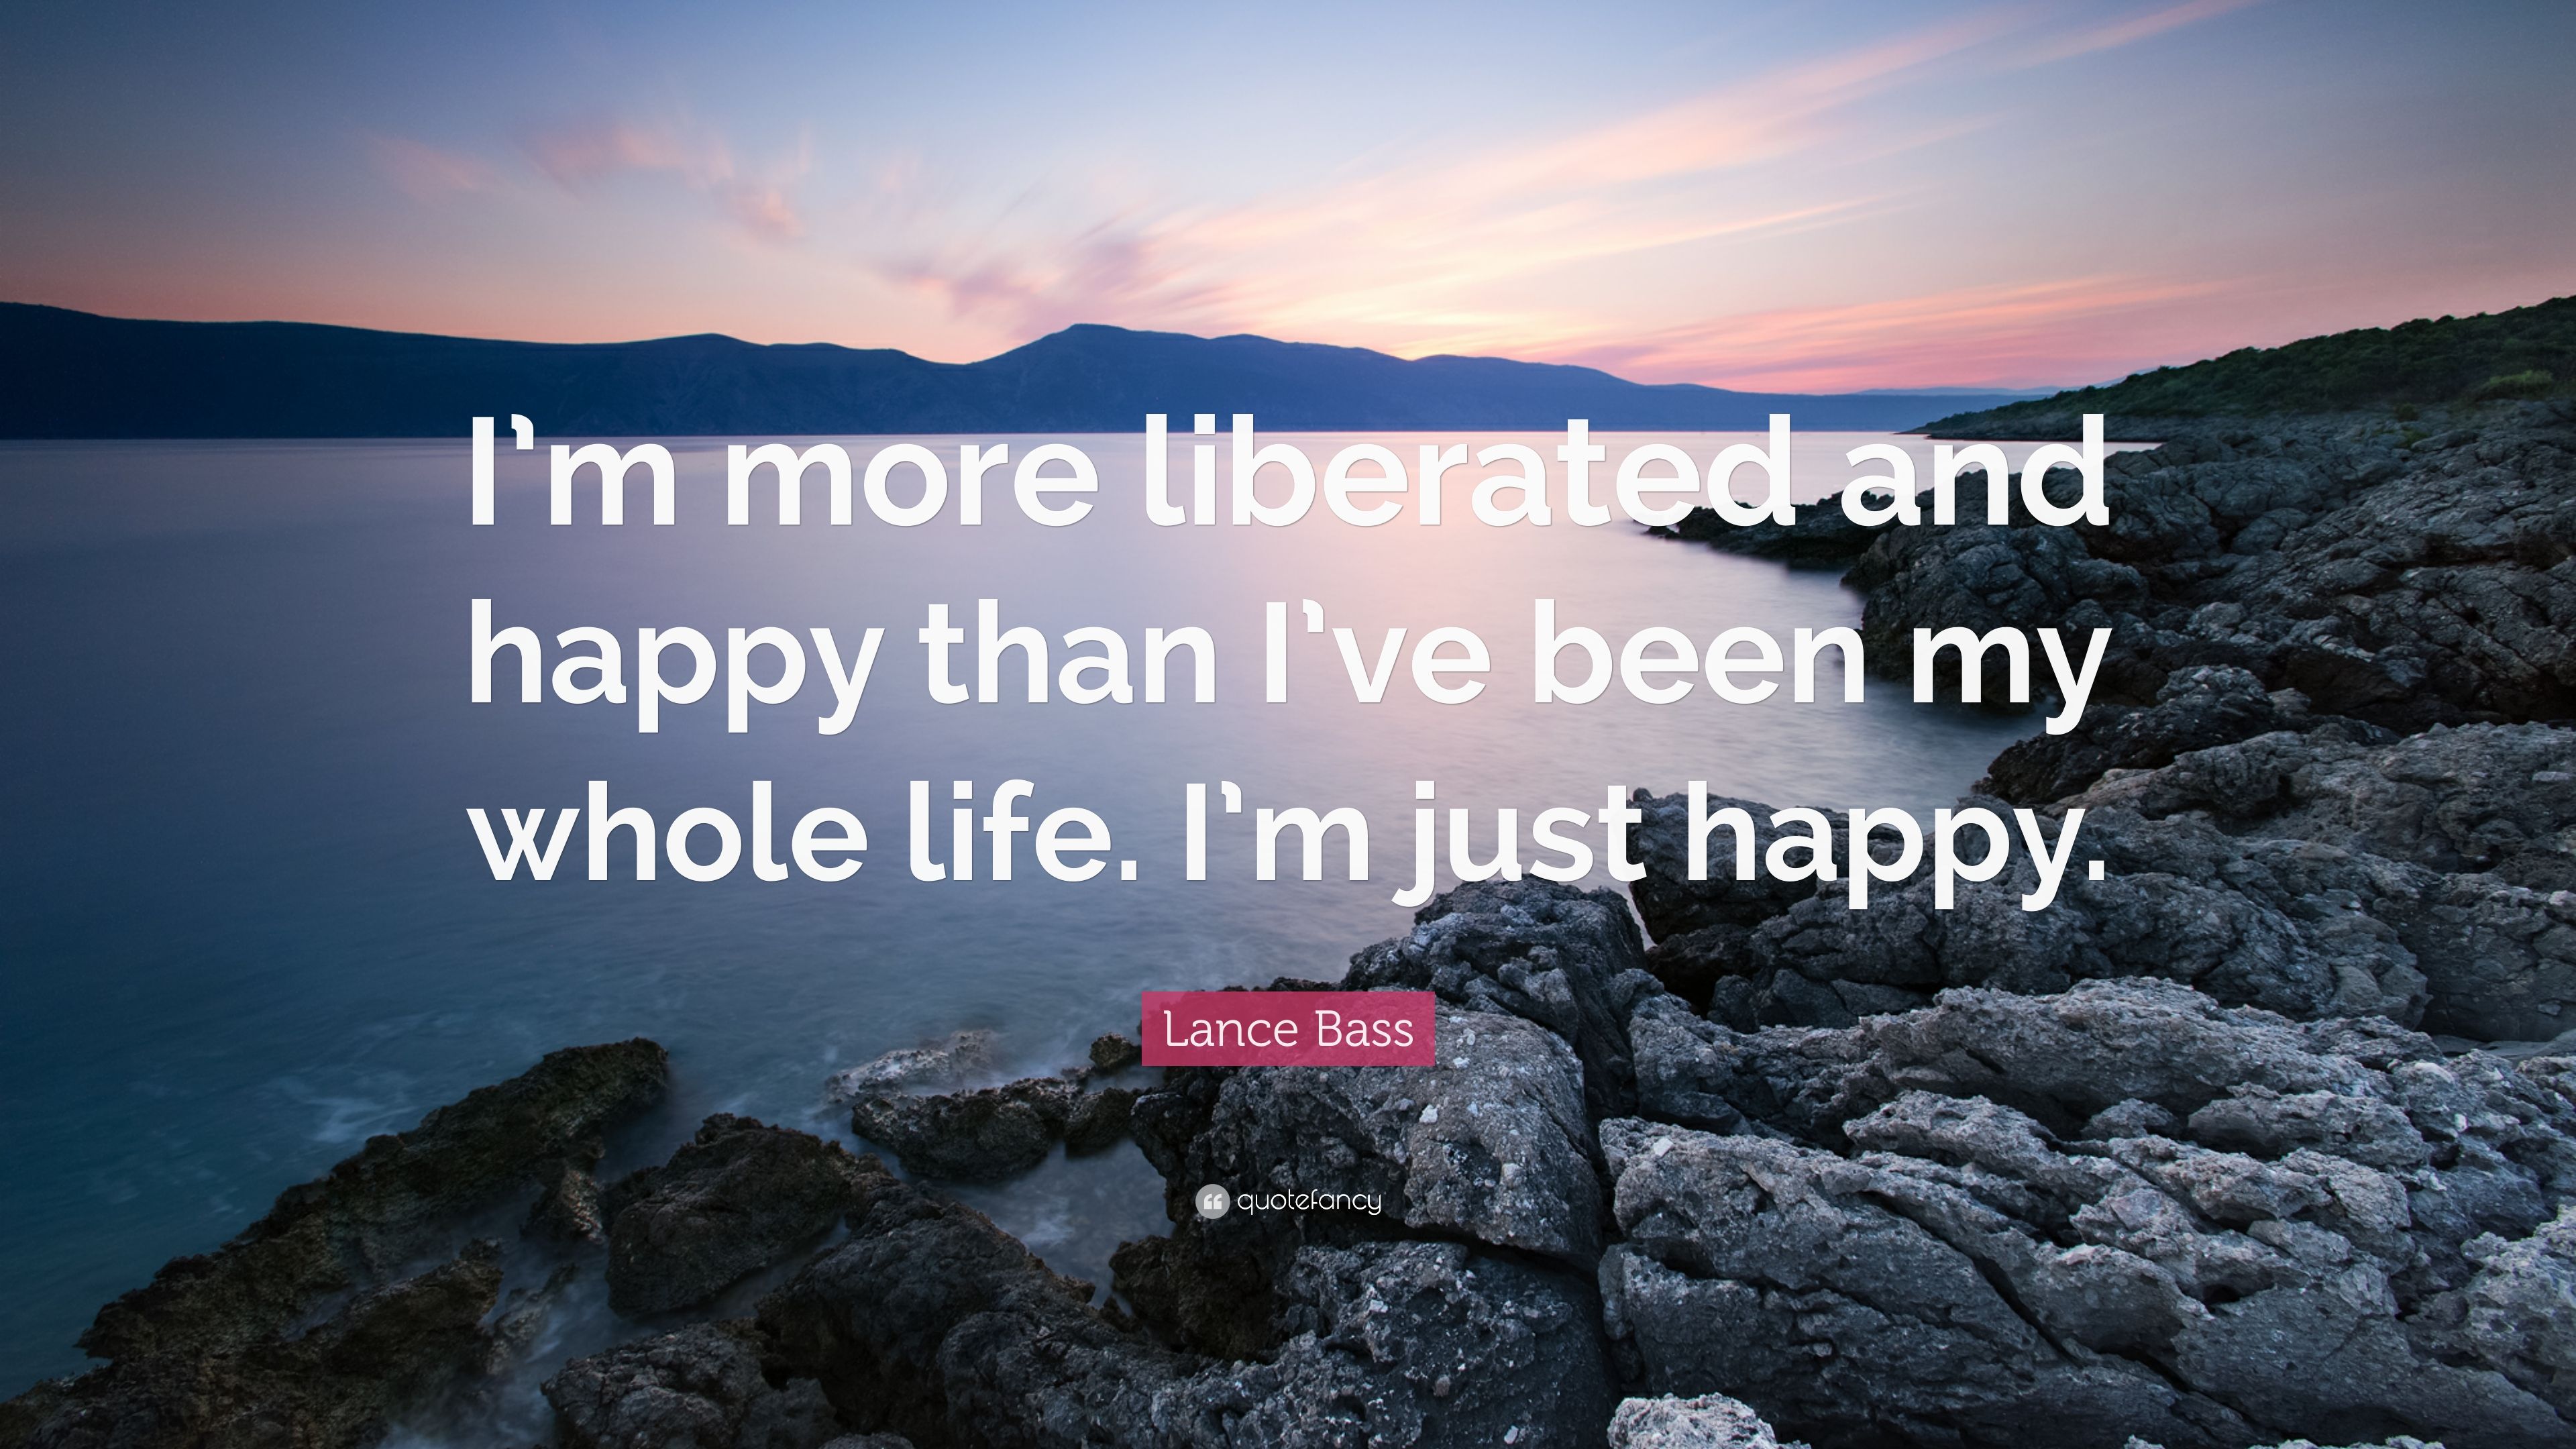 Lance Bass Quote: “I'm more liberated and happy than I've been my